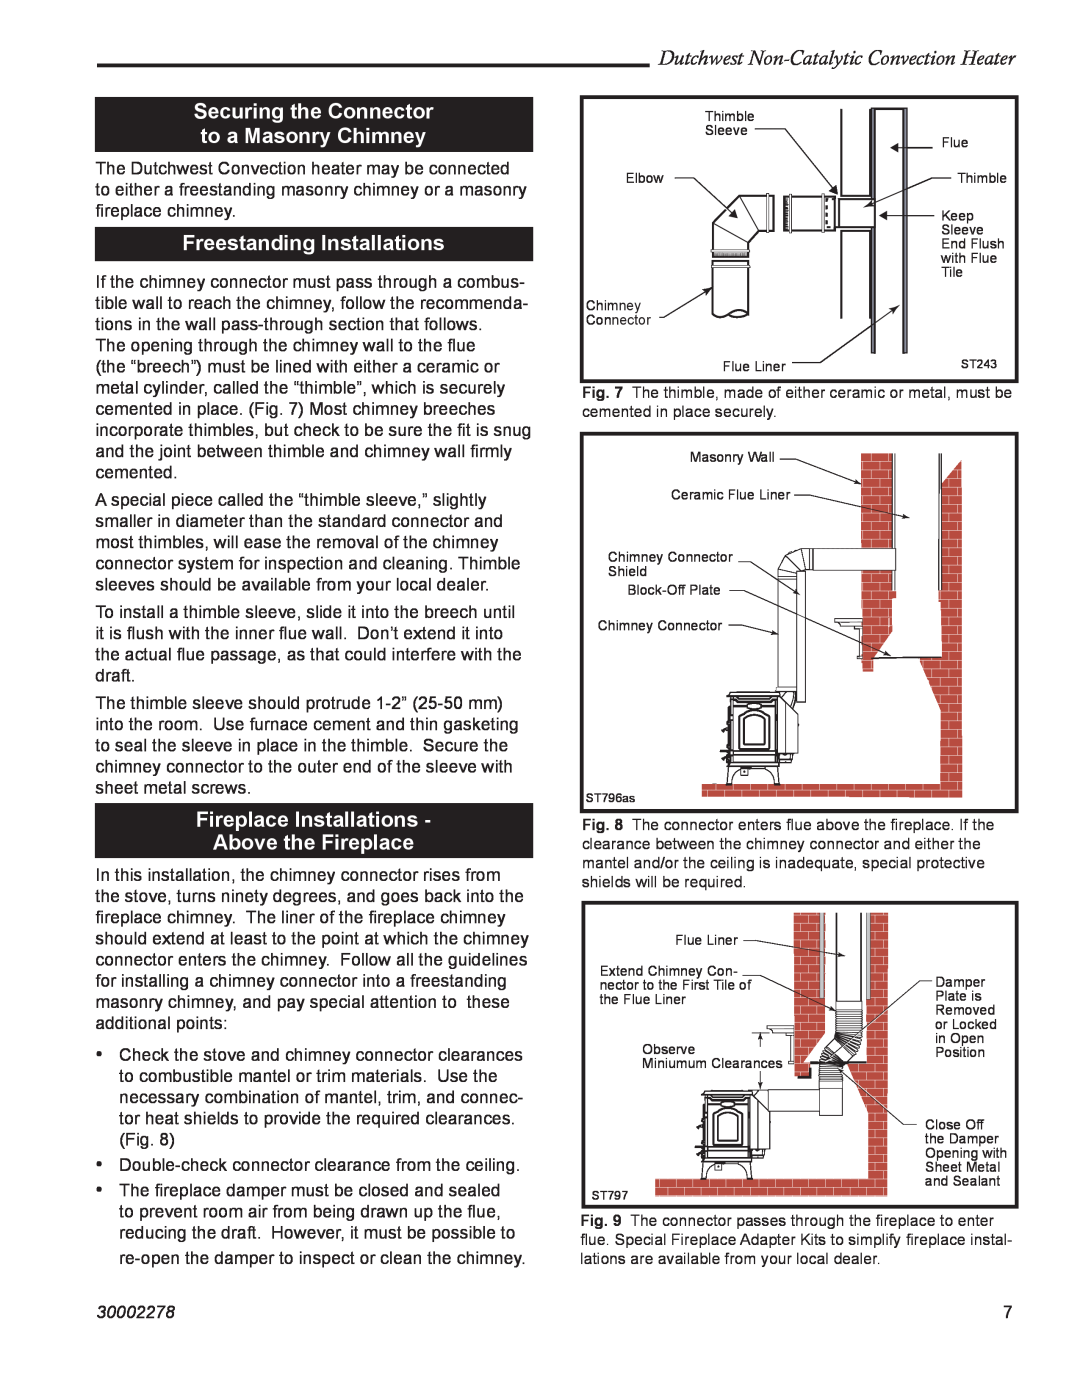 Vermont Casting 2478 manual Securing the Connector to a Masonry Chimney, Freestanding Installations, 30002278 